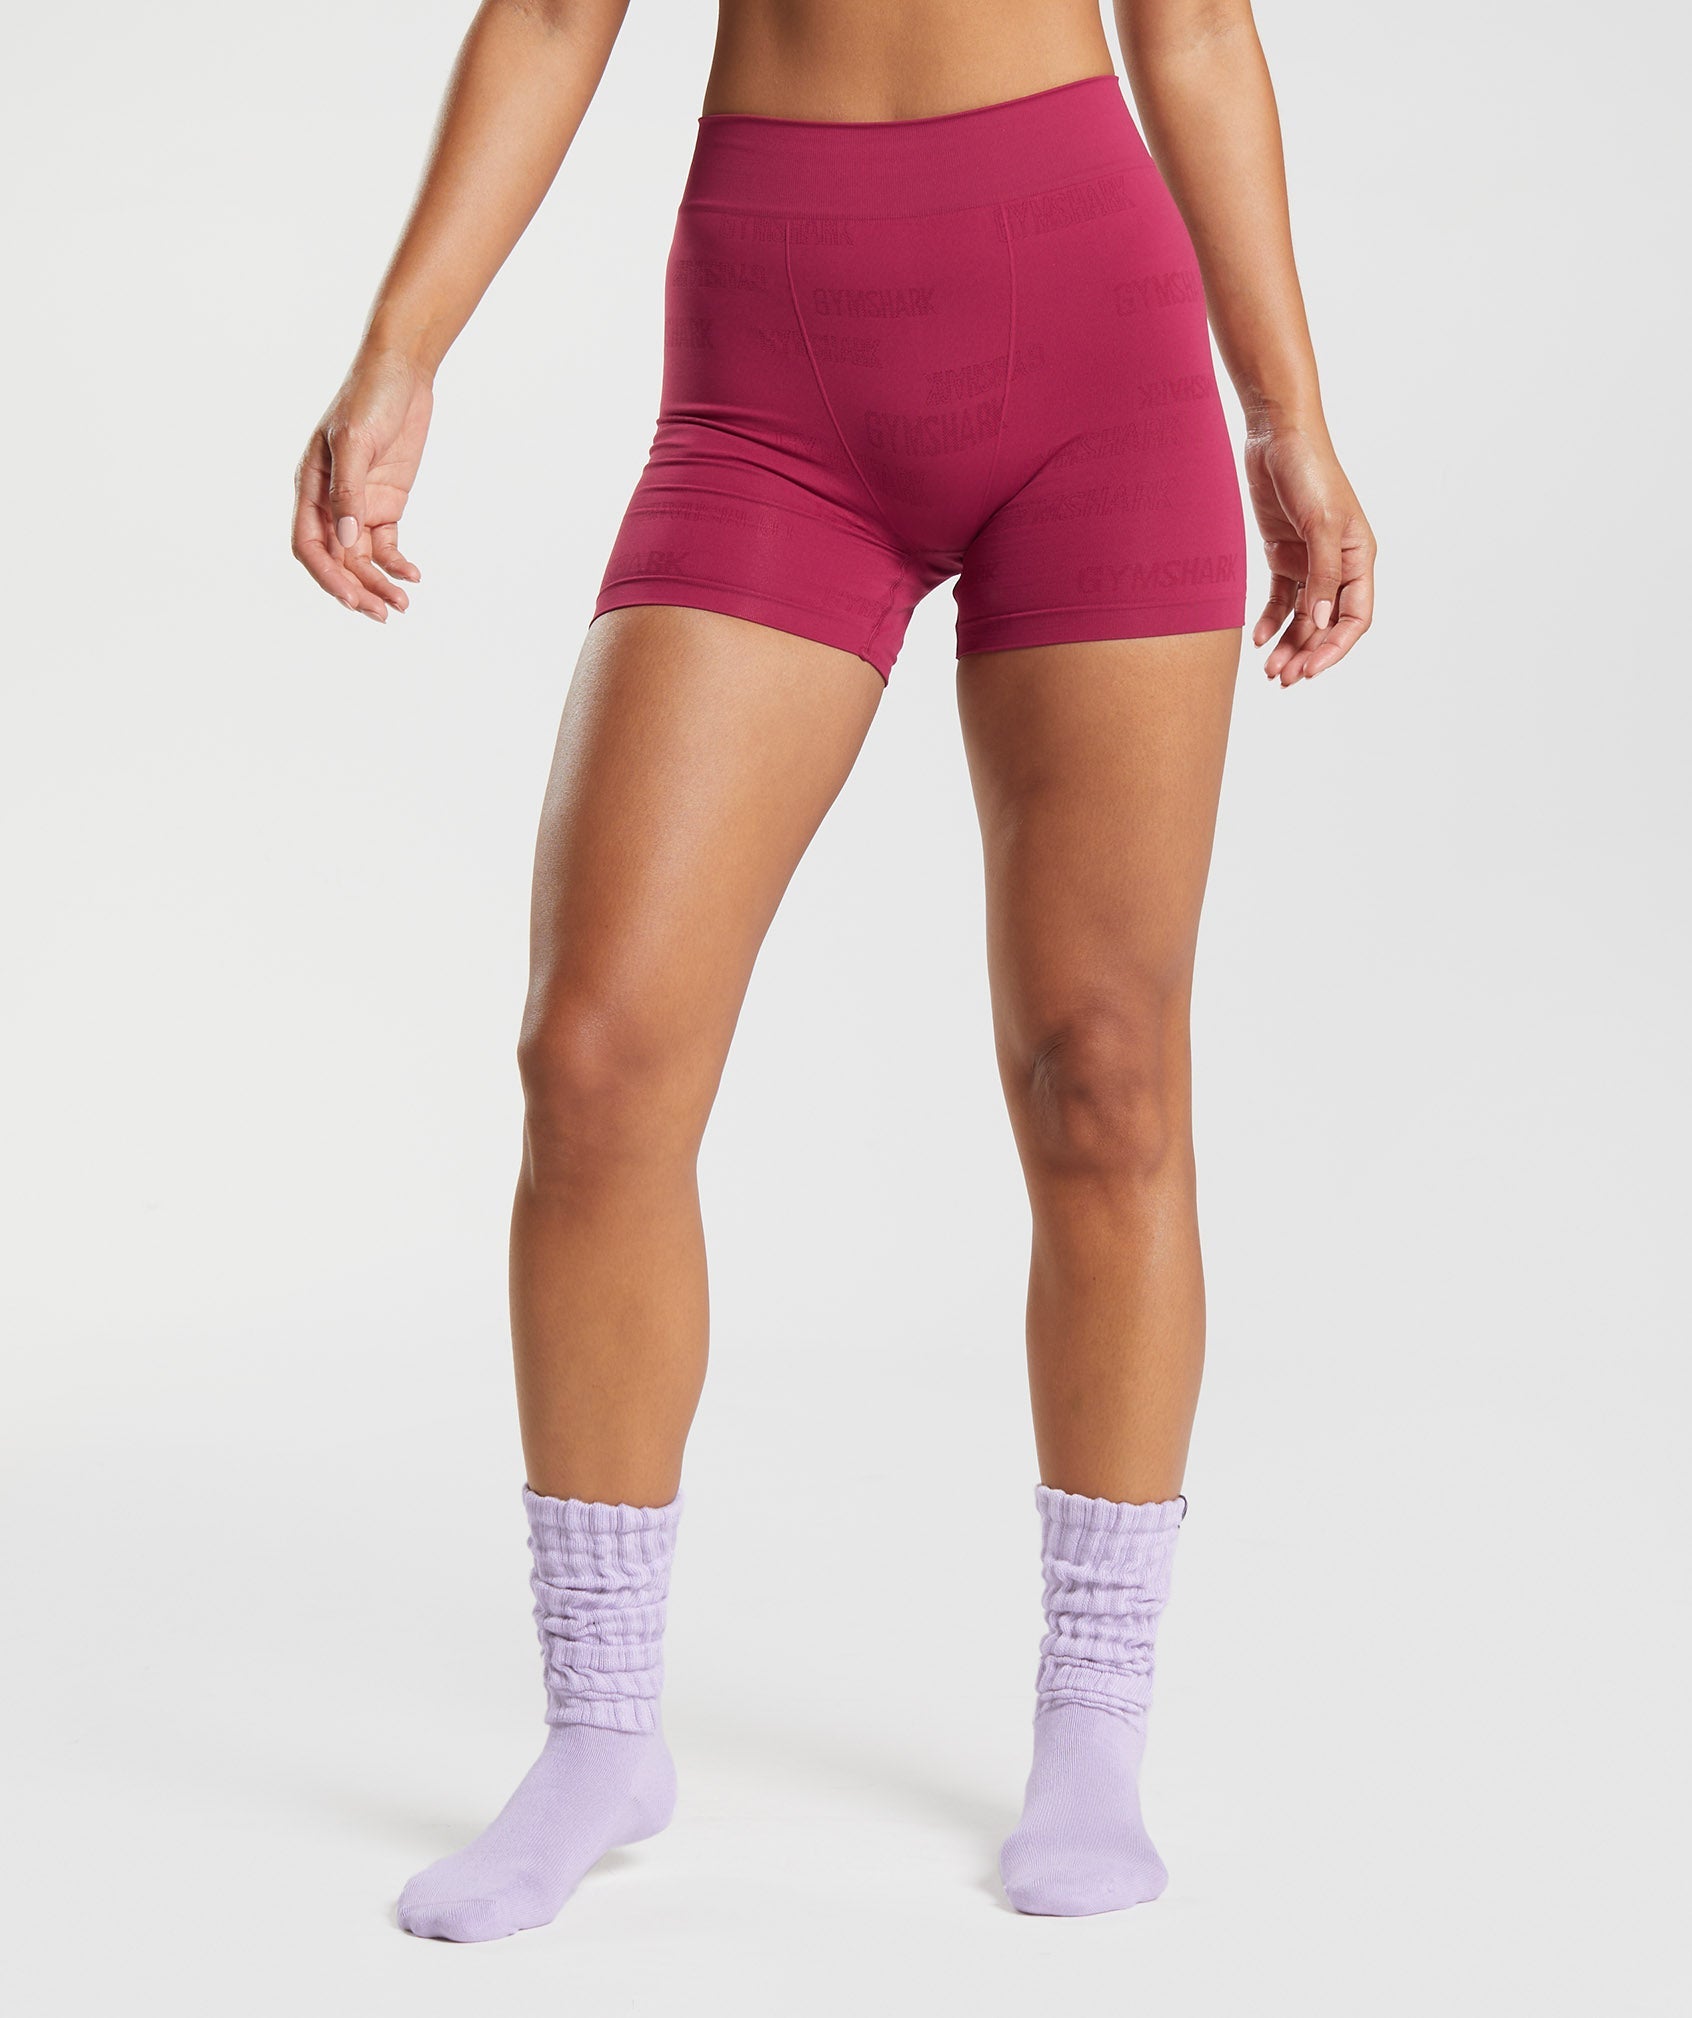 Gymshark Seamless Jacquard Boxers - Currant Pink